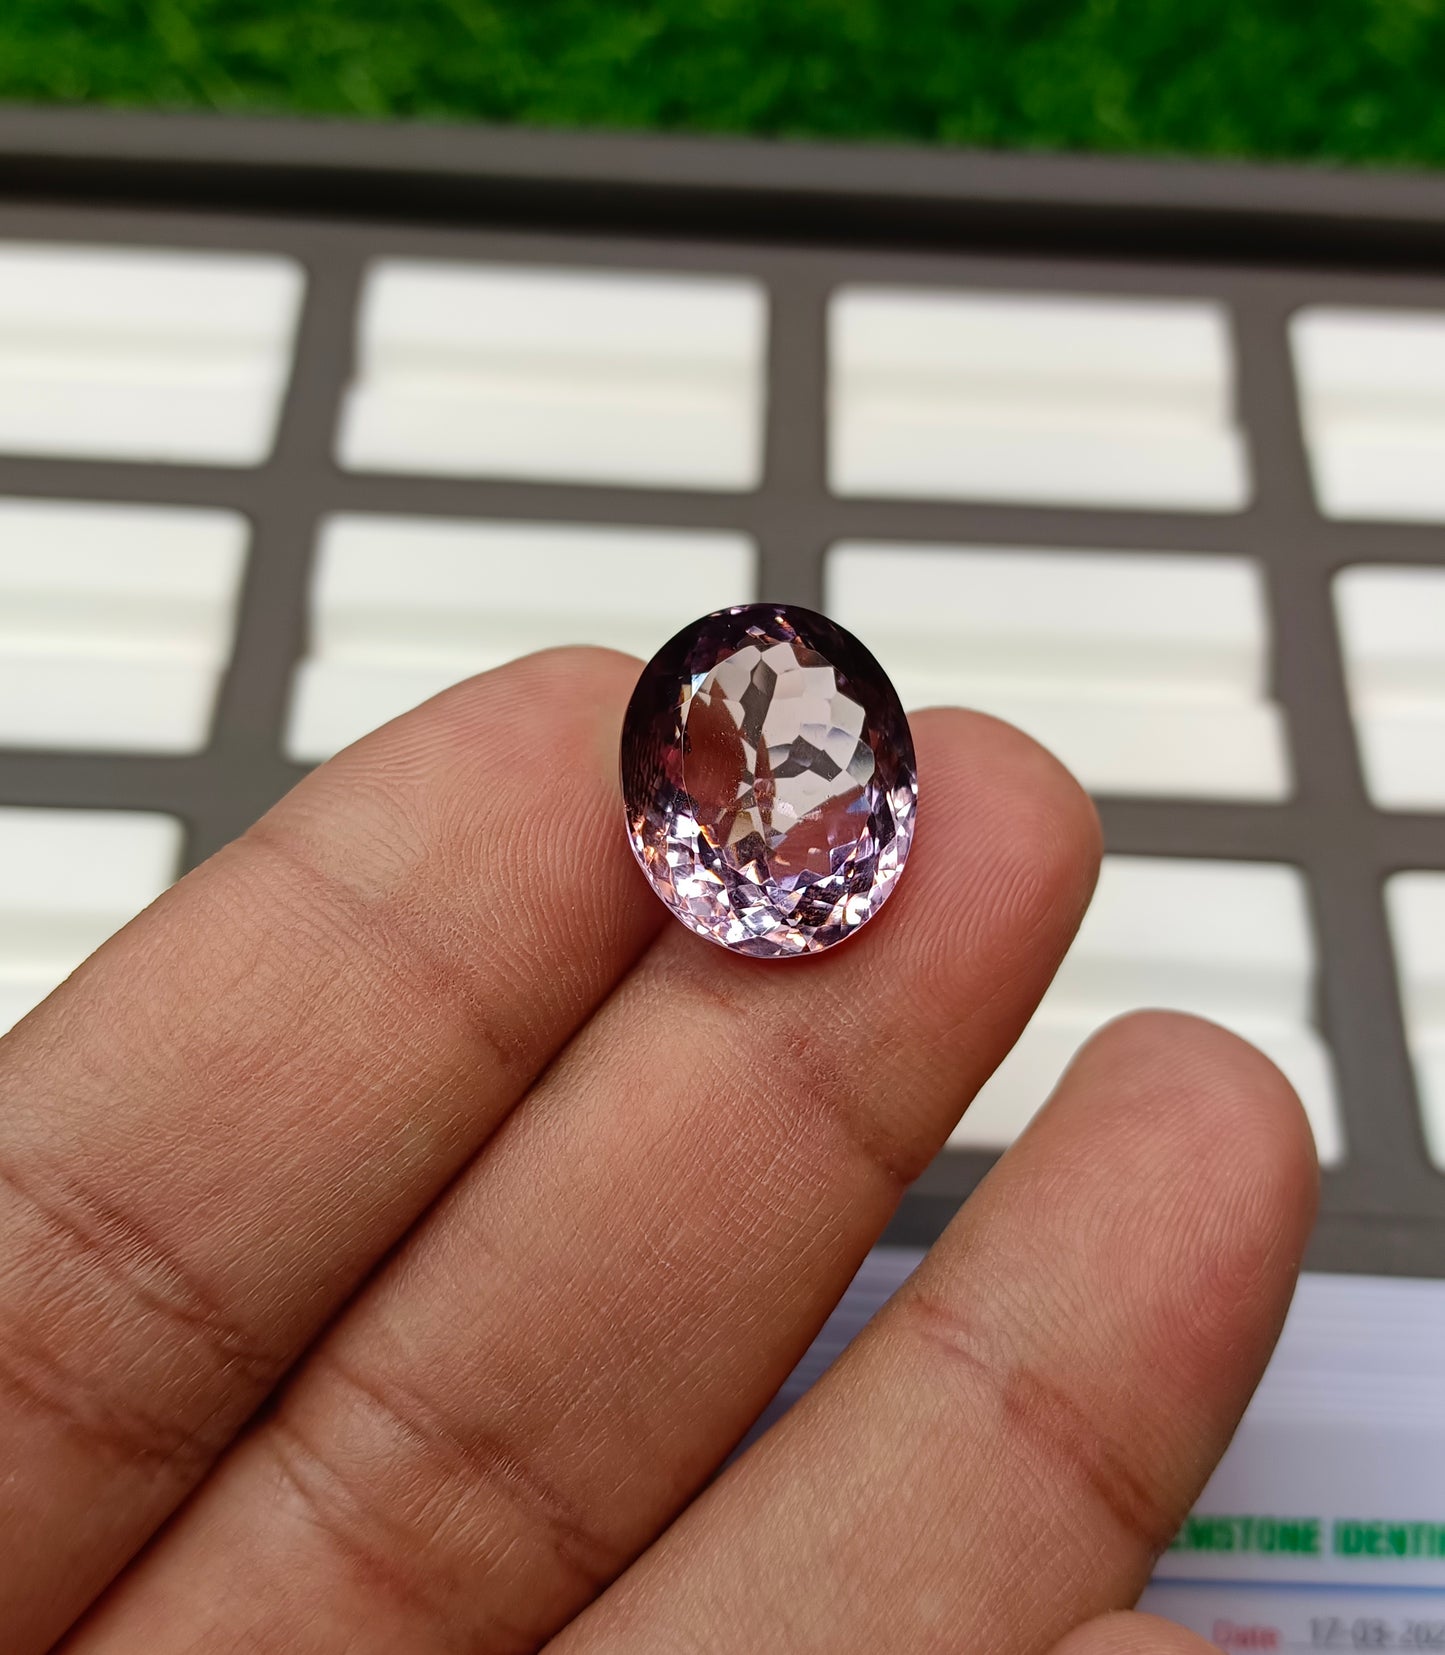 Premium Quality Amethyst Stone with lab certificate